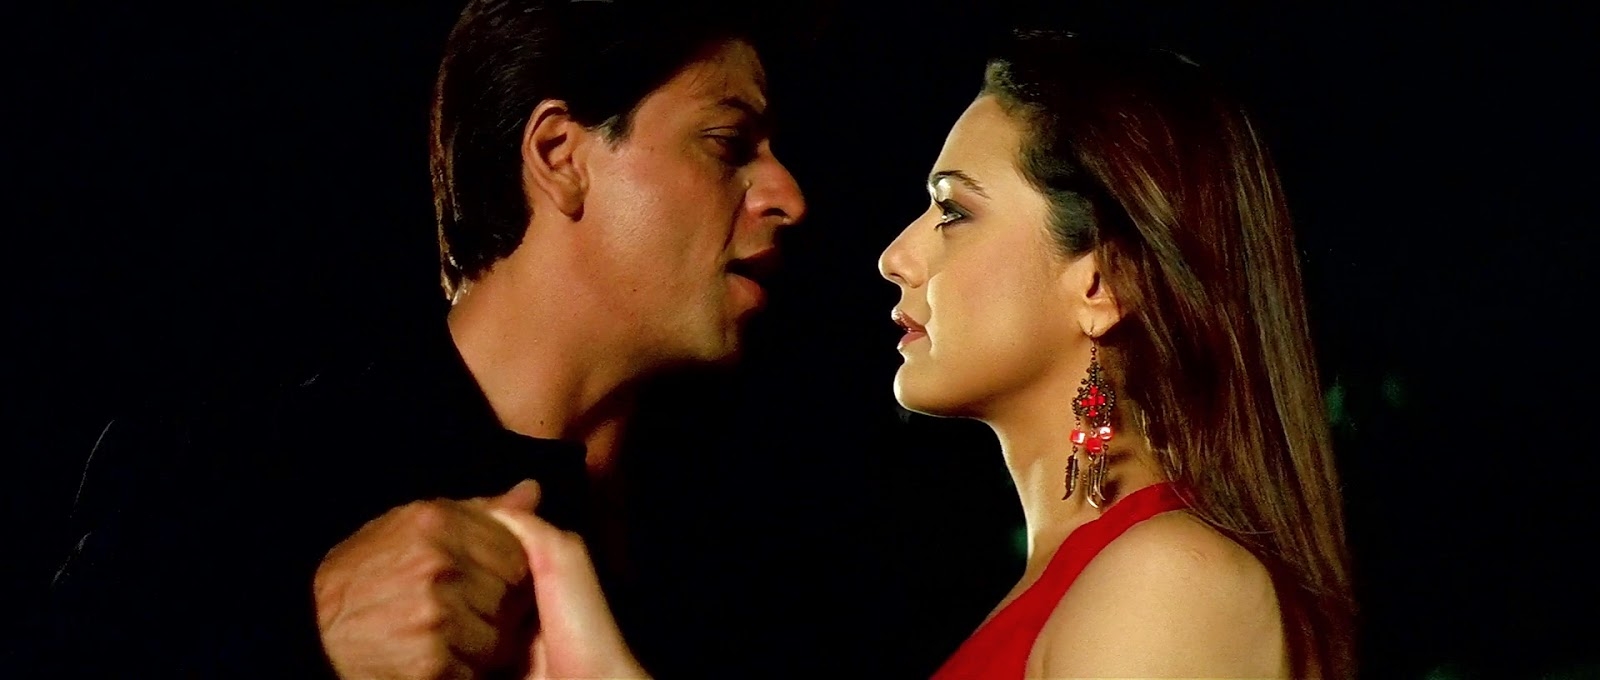 kal-ho-naa-ho-turns-19-shah-rukh-khan-preity-zinta-discuss-relationship-donts-from-the-movie-dating-toxic